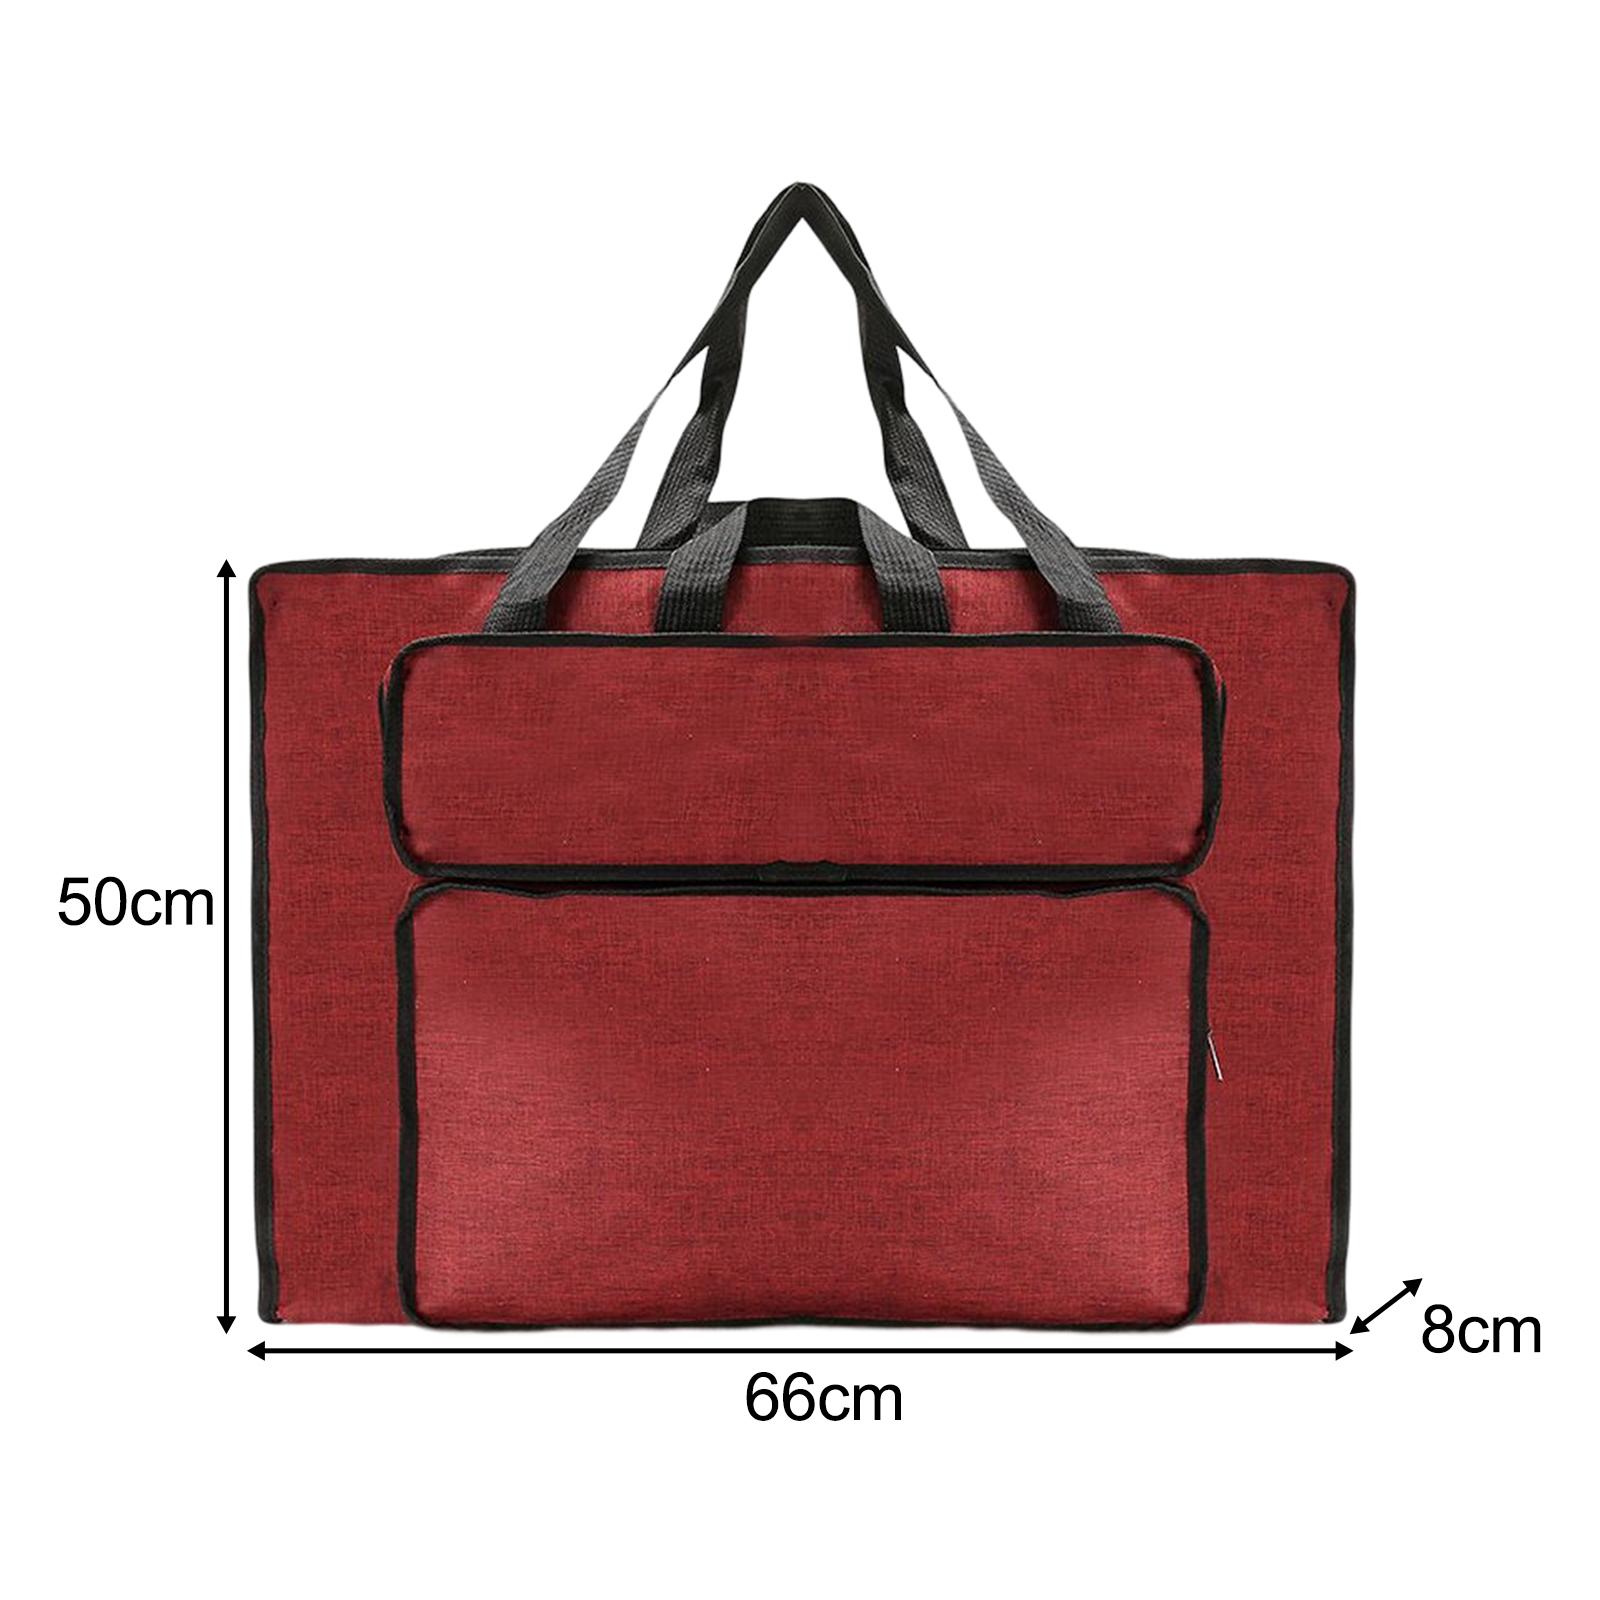 Waterproof Nylon Art Portfolio Case Art Supplies Large Capacity Multifunction Wear Resistant Painting Board Bag for Traveling Carrying Red Large, Size